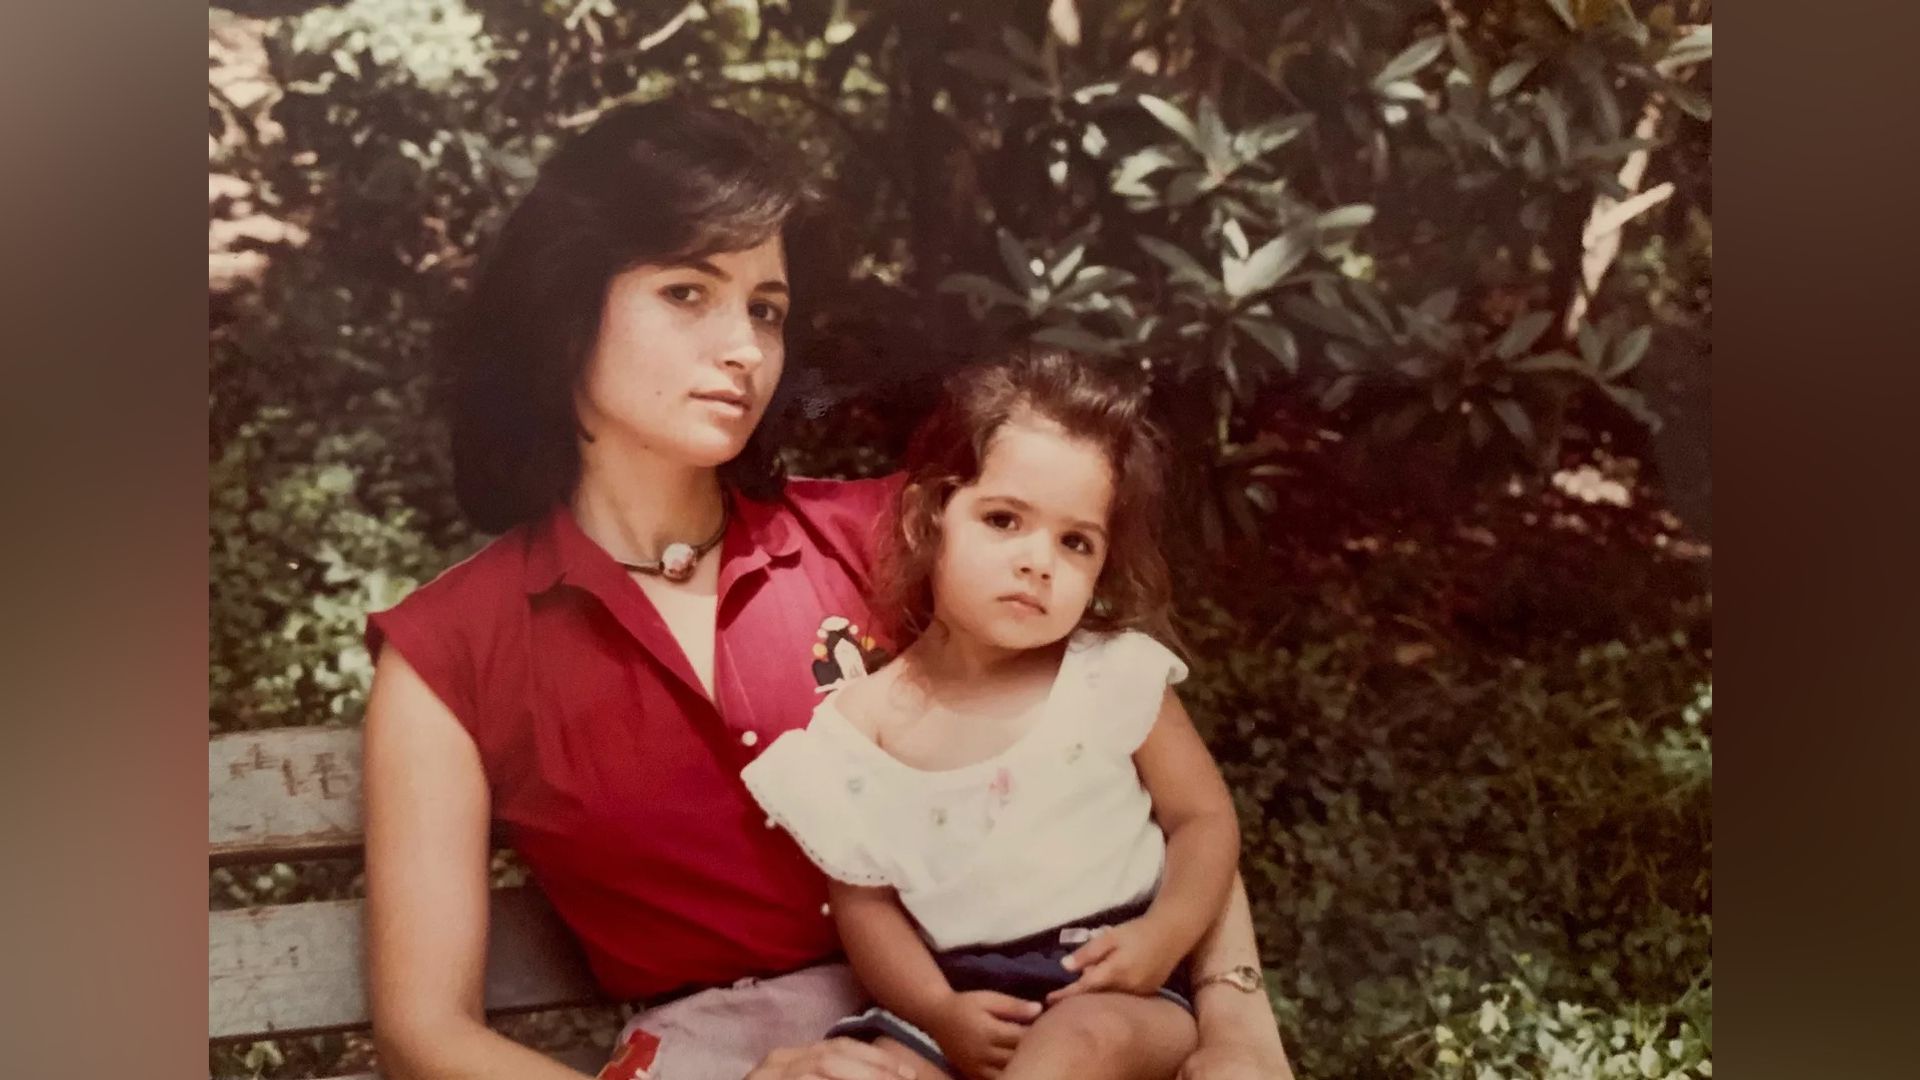 Sarah Shahi as a kid with her mother